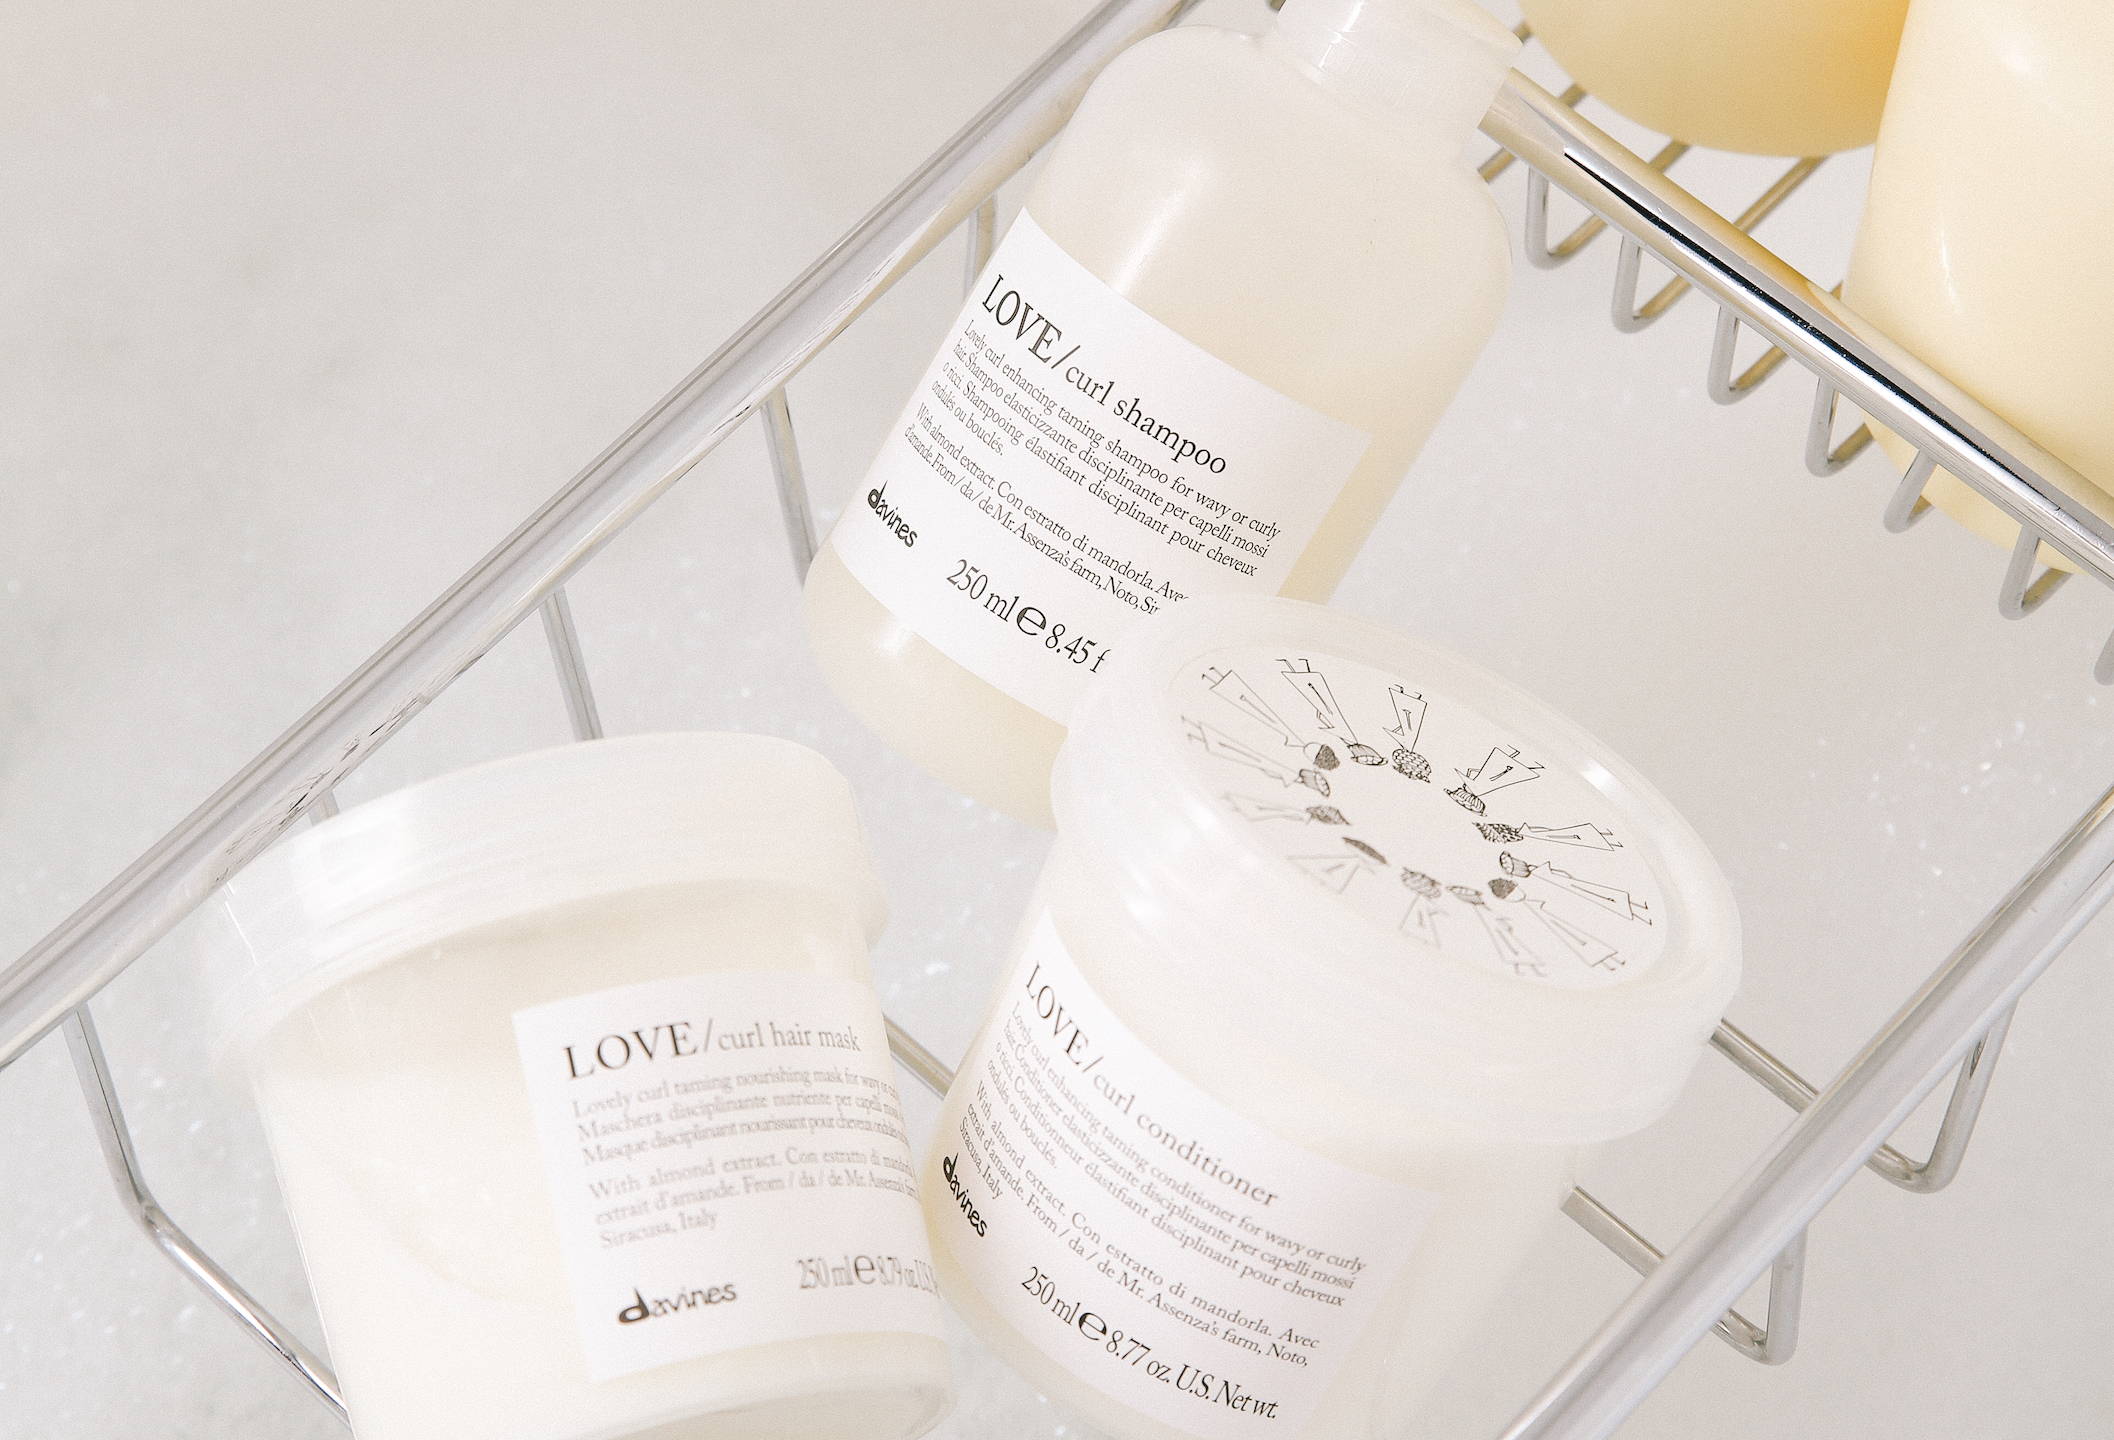 Davines LOVE Curl hair care products